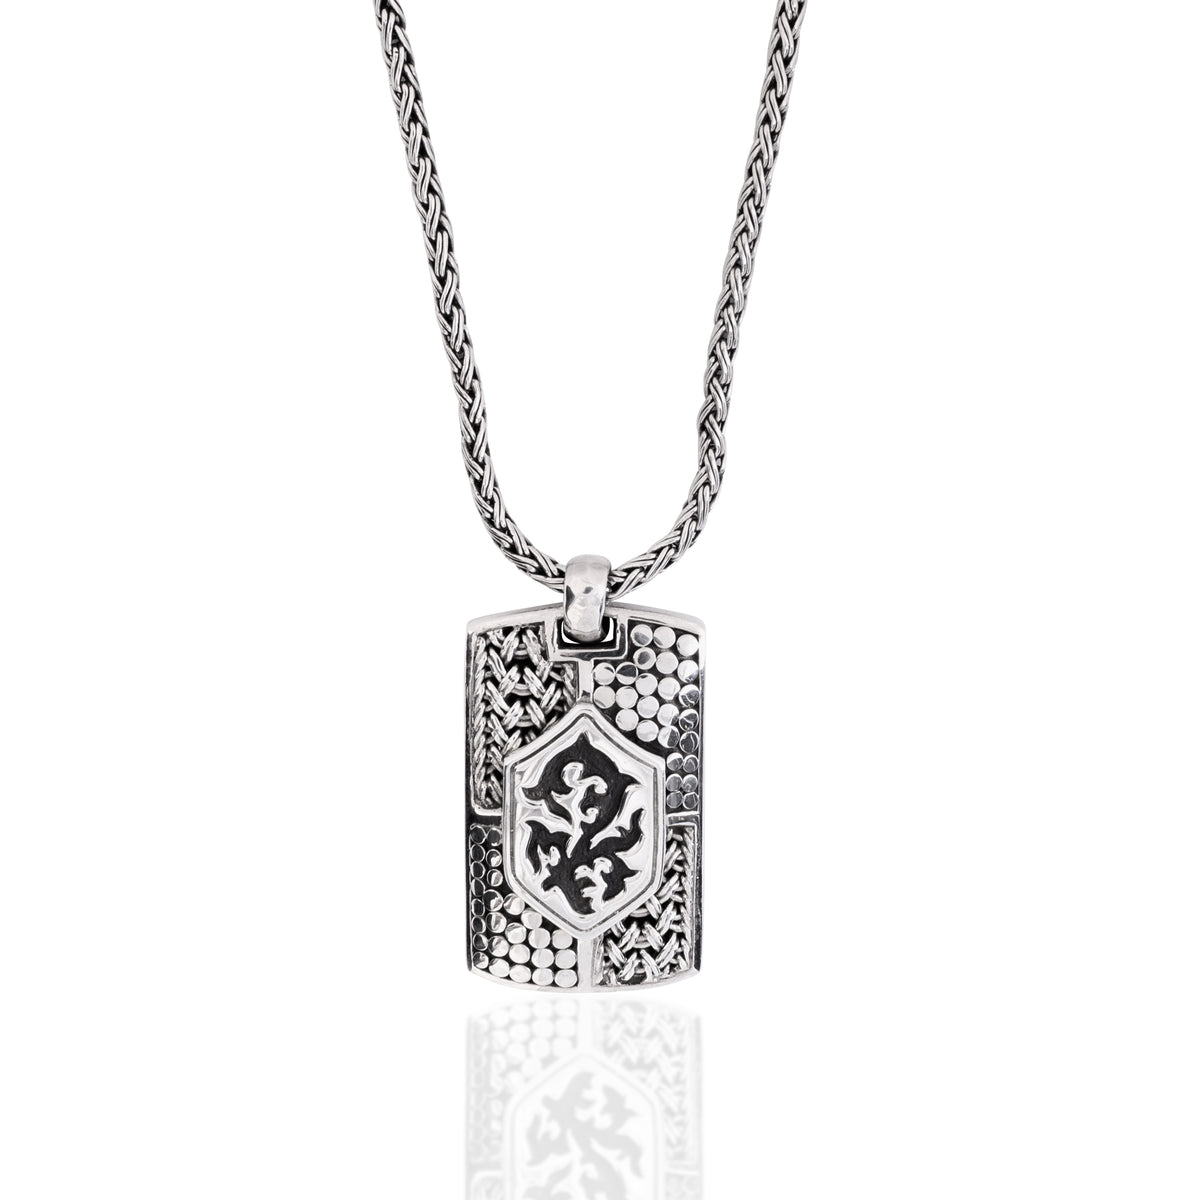 Classic LH Tribal Scroll Middle with Woven ID Tag Pendant Necklace. 35mm x 21mm Pendant